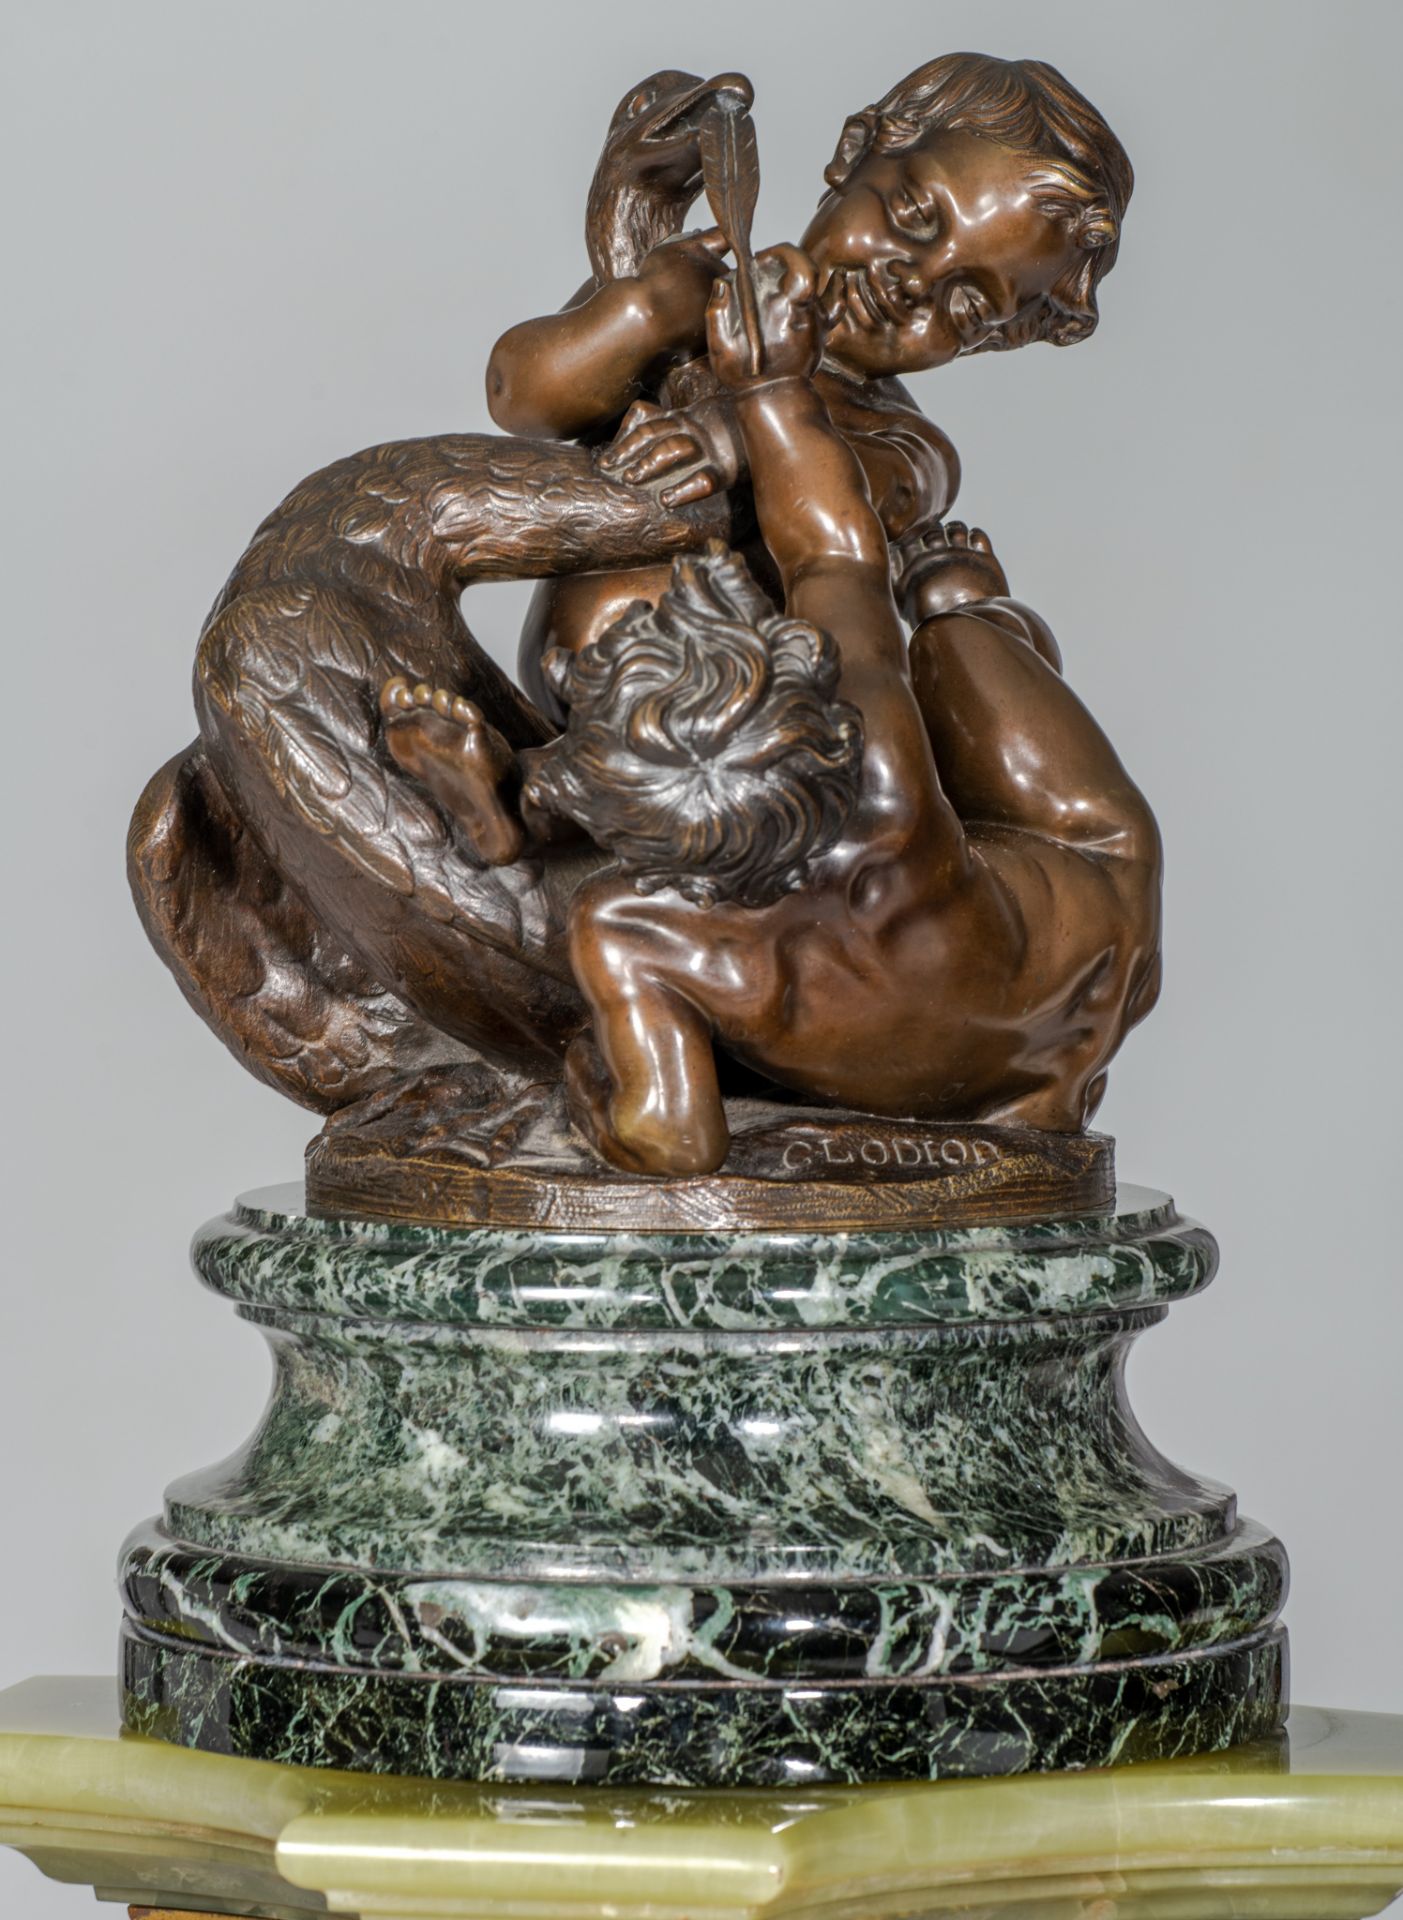 Clodion, putti playing with a swan, patinated bronze on a marble pedestal, H 145 cm (total height) - Image 9 of 18